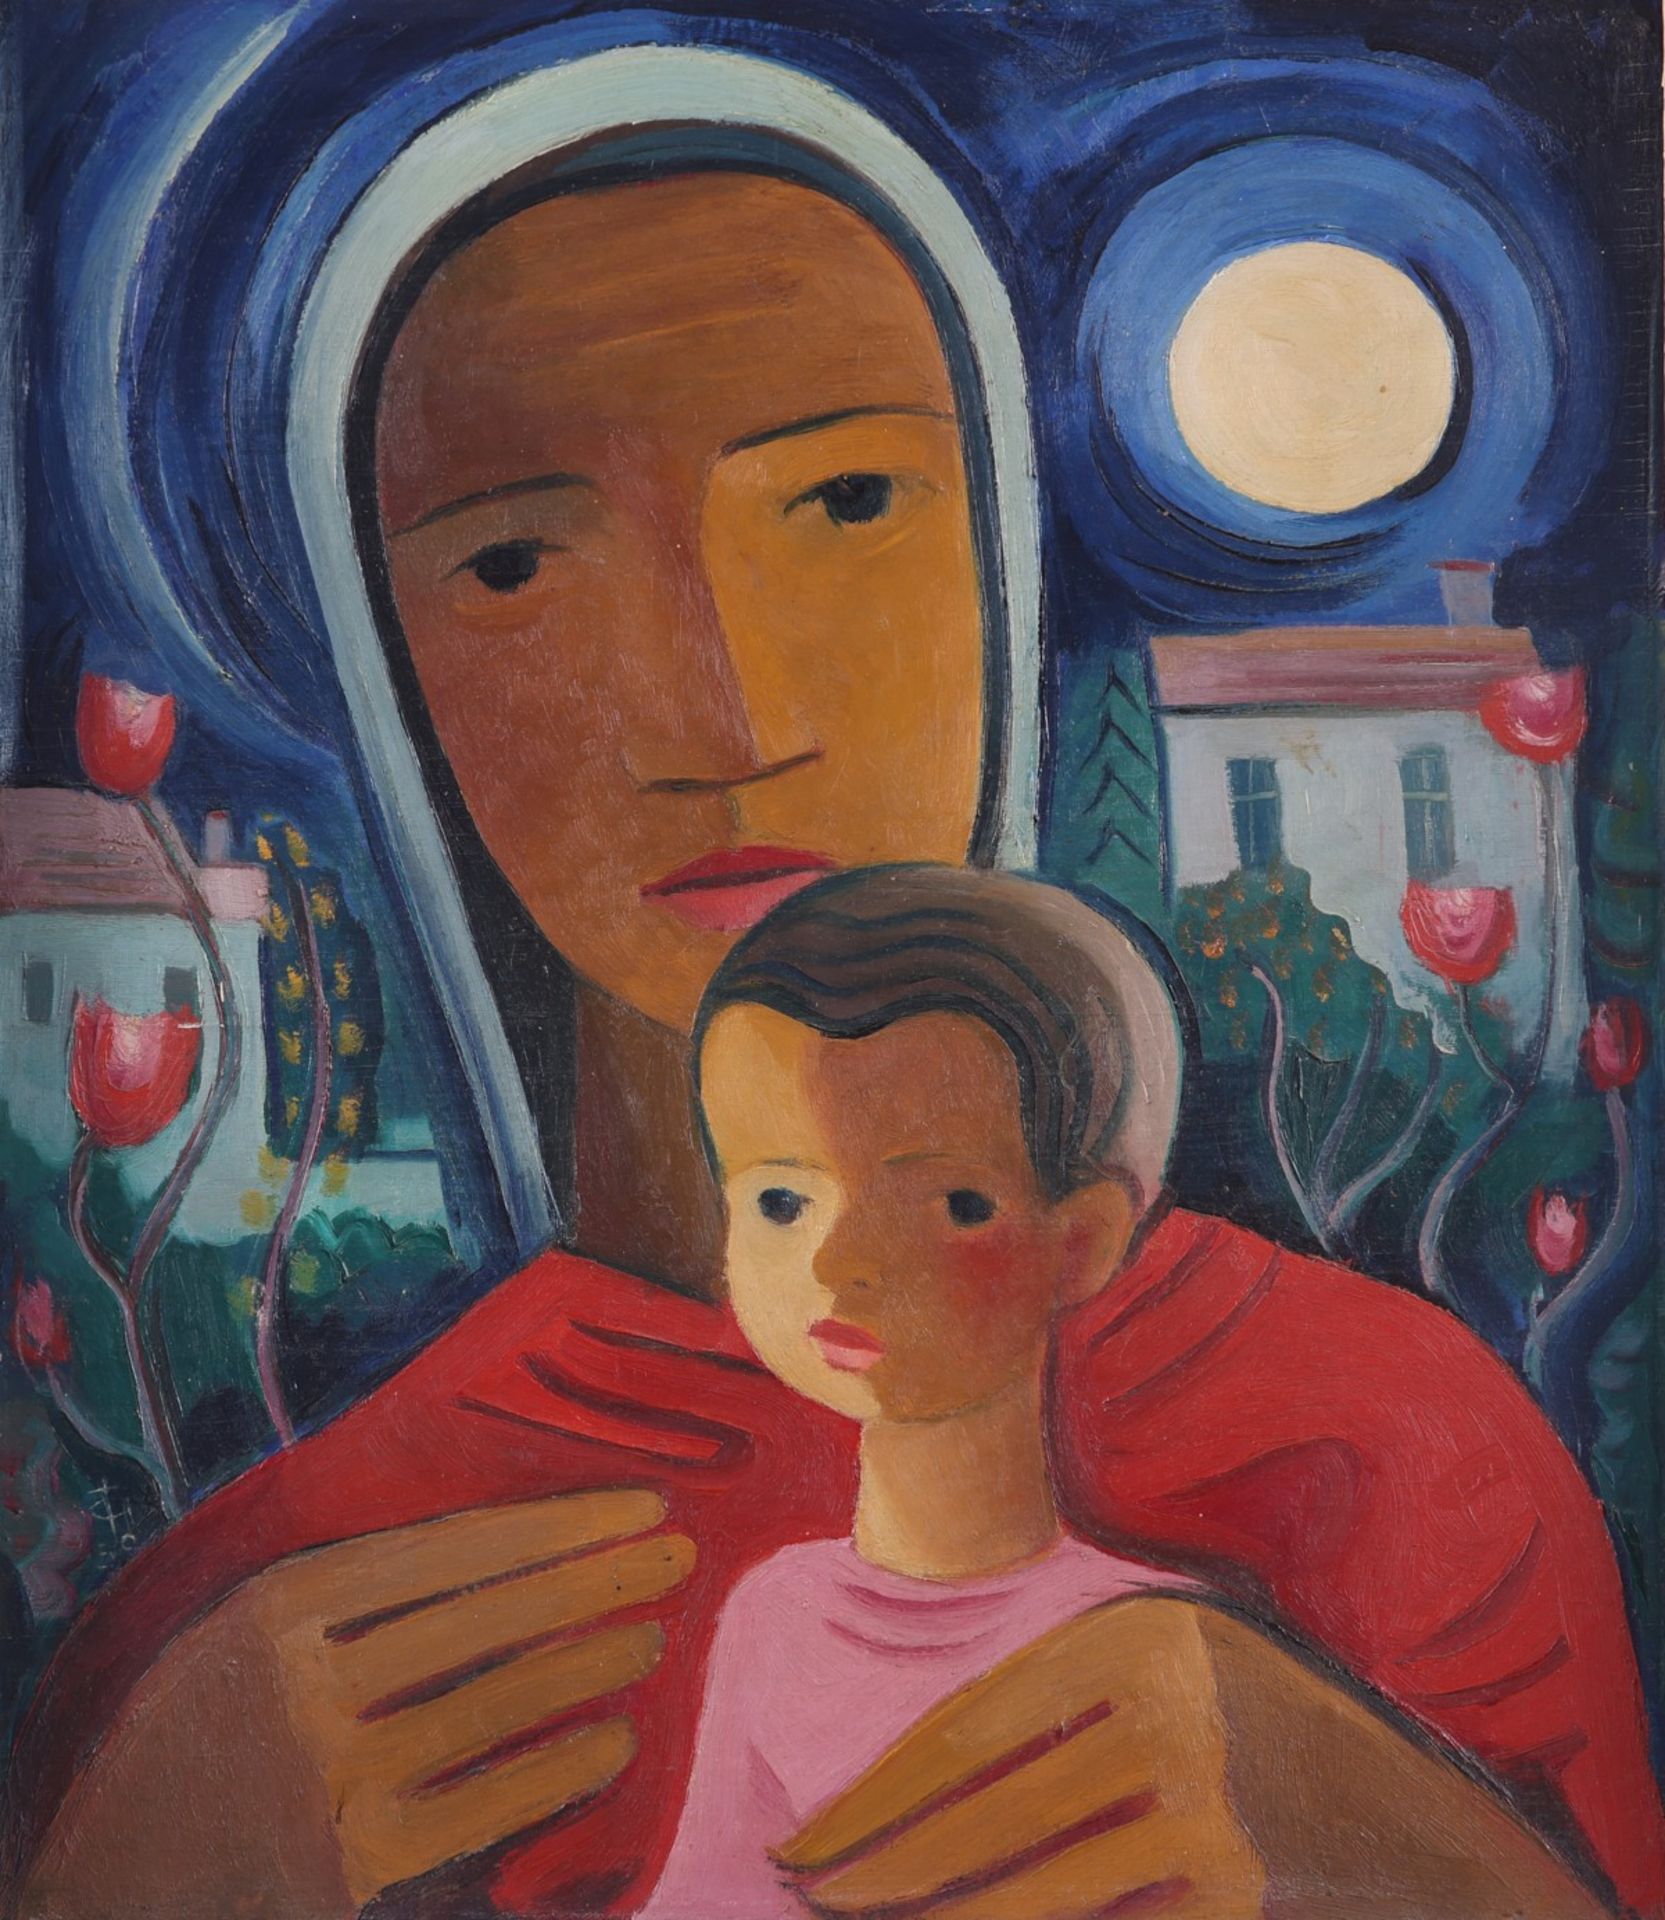 Carry Hauser Madonna & Child Oil on Panel